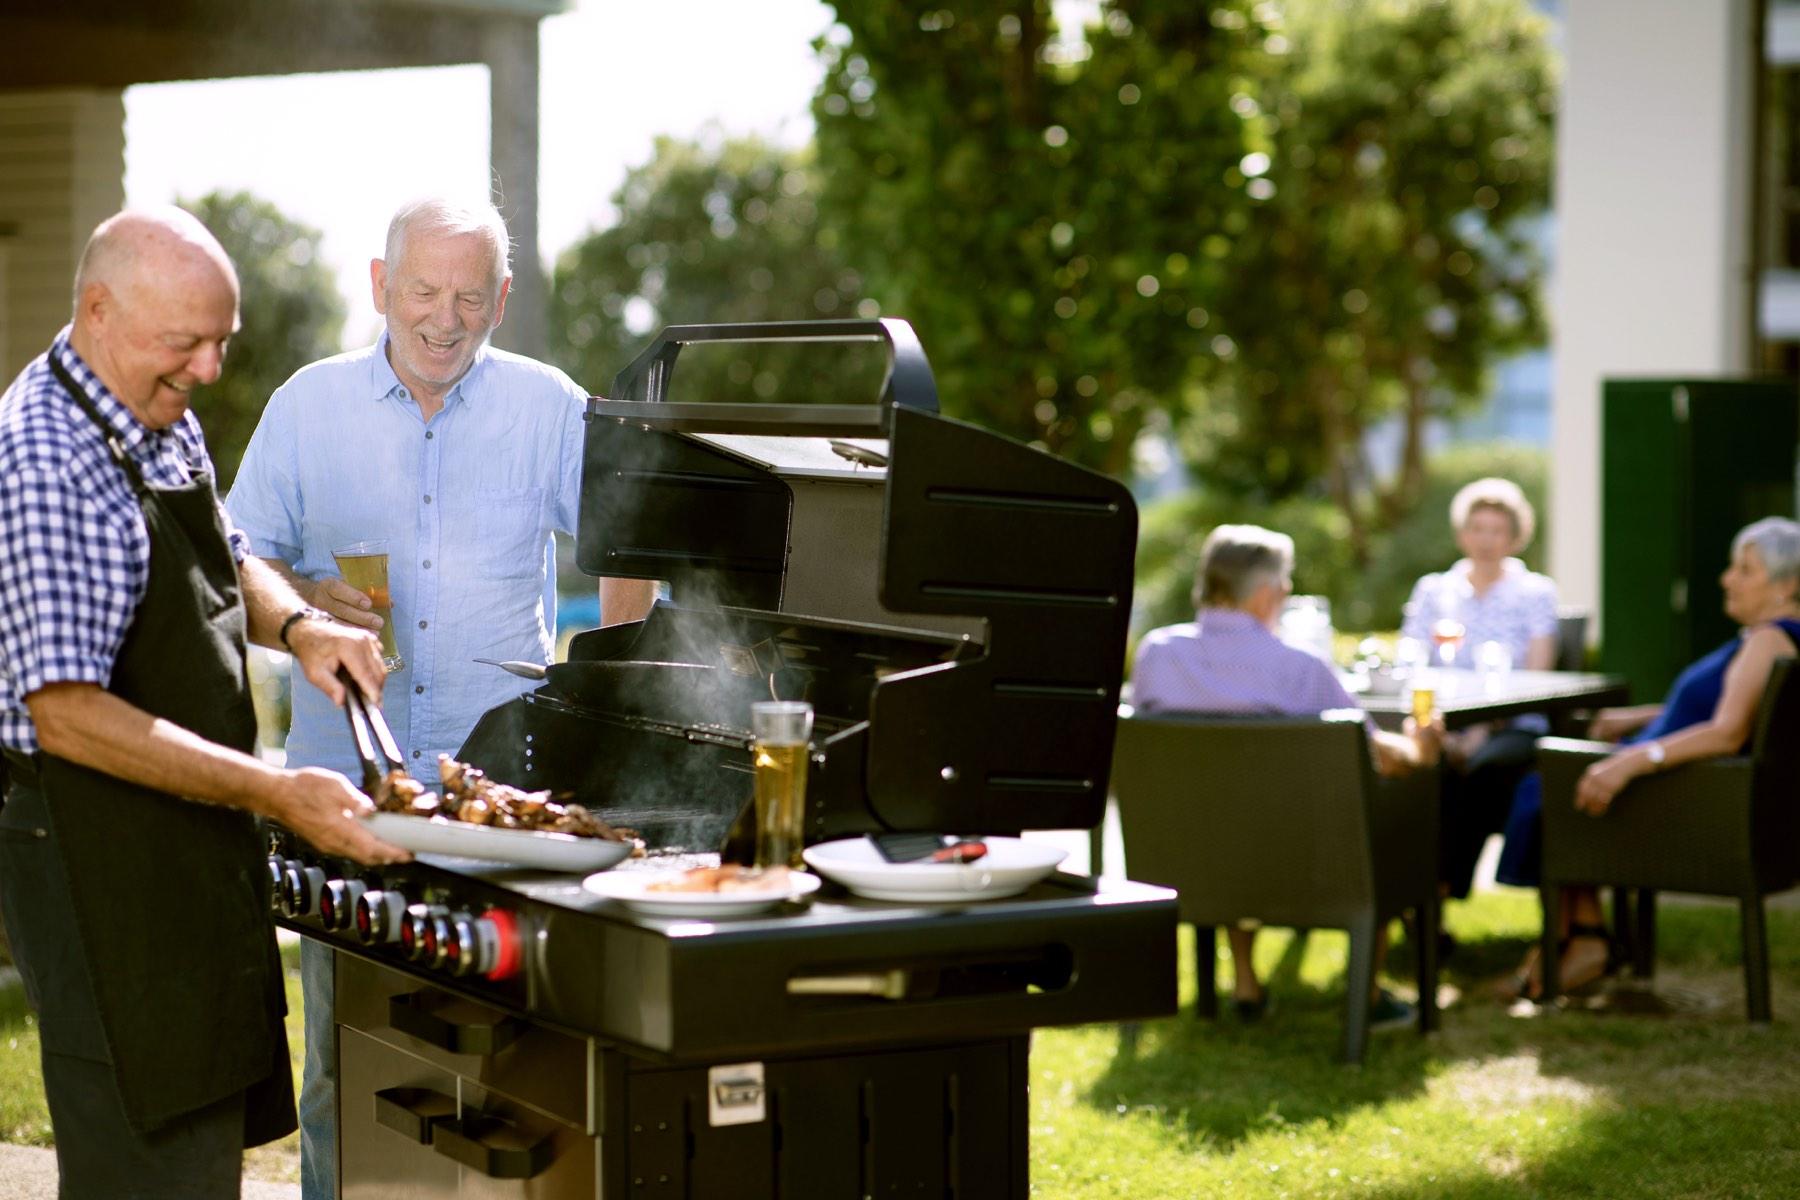 Retirement village residents barbecuing